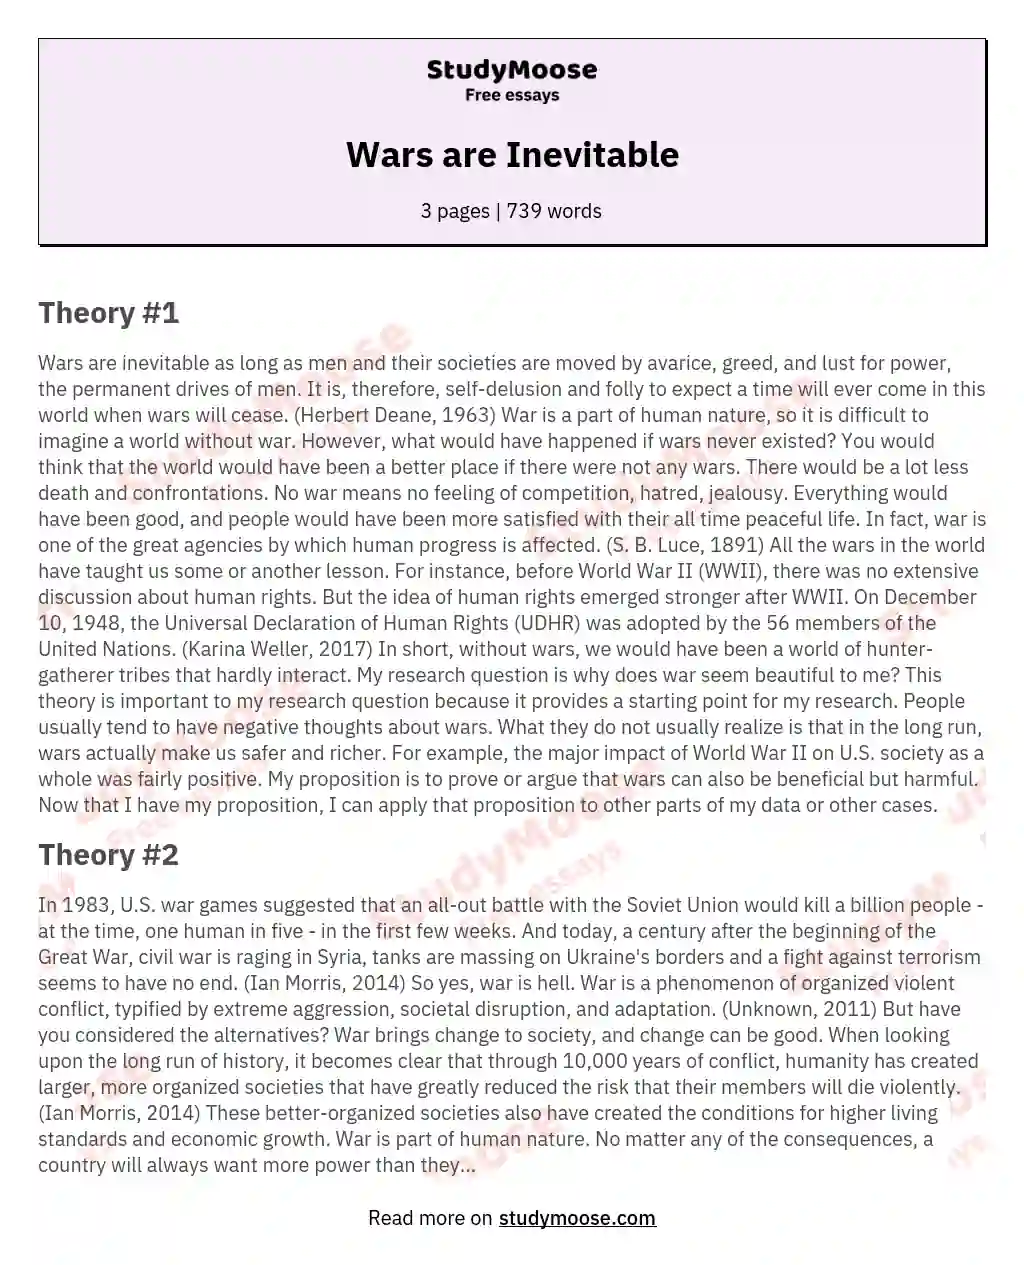 was the cold war inevitable essay